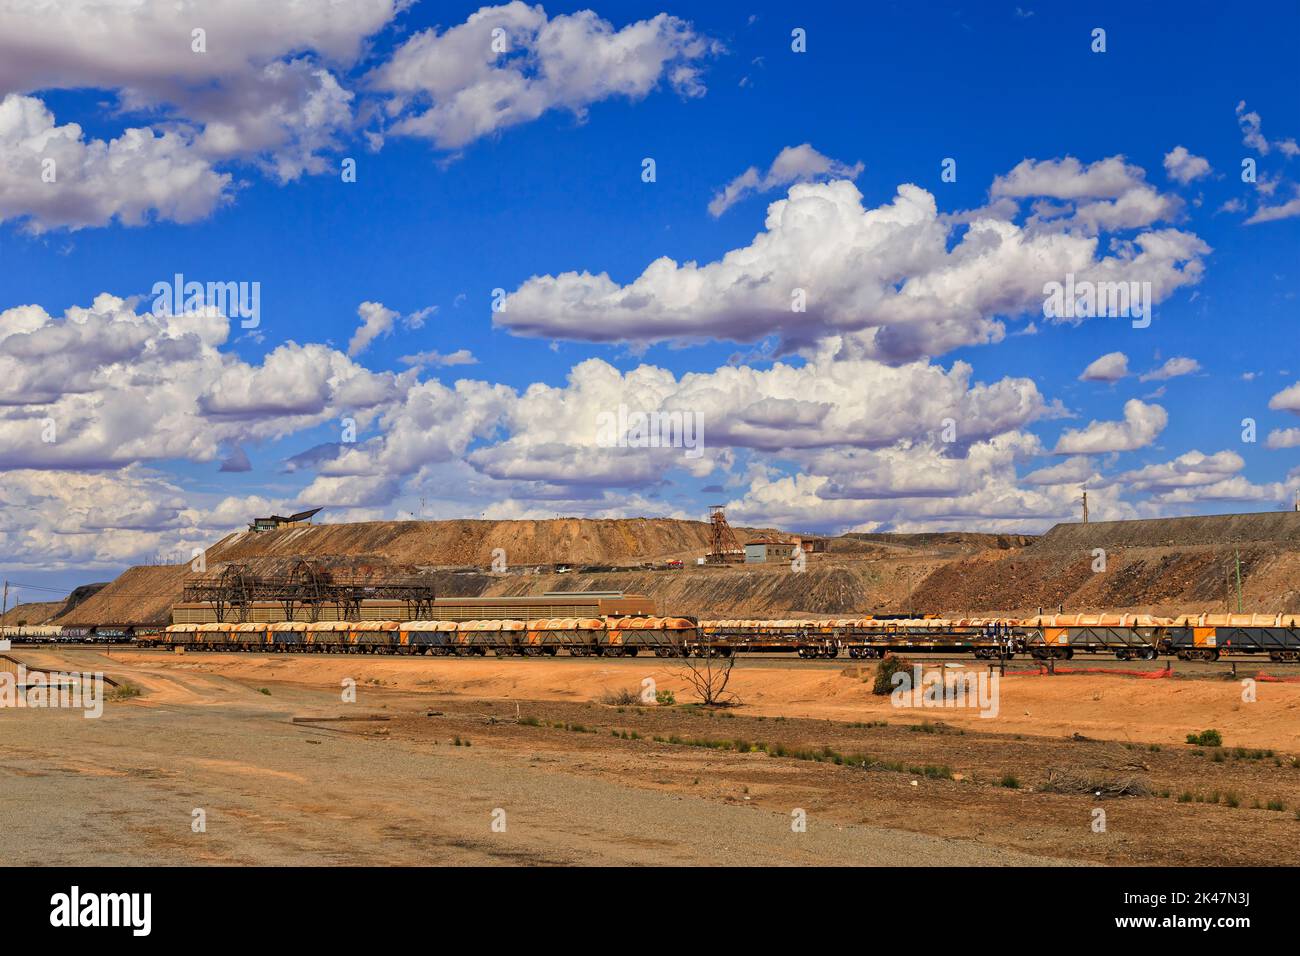 Freight train at open pit mine in Broken hill silver city the capital of Australian outback. Stock Photo